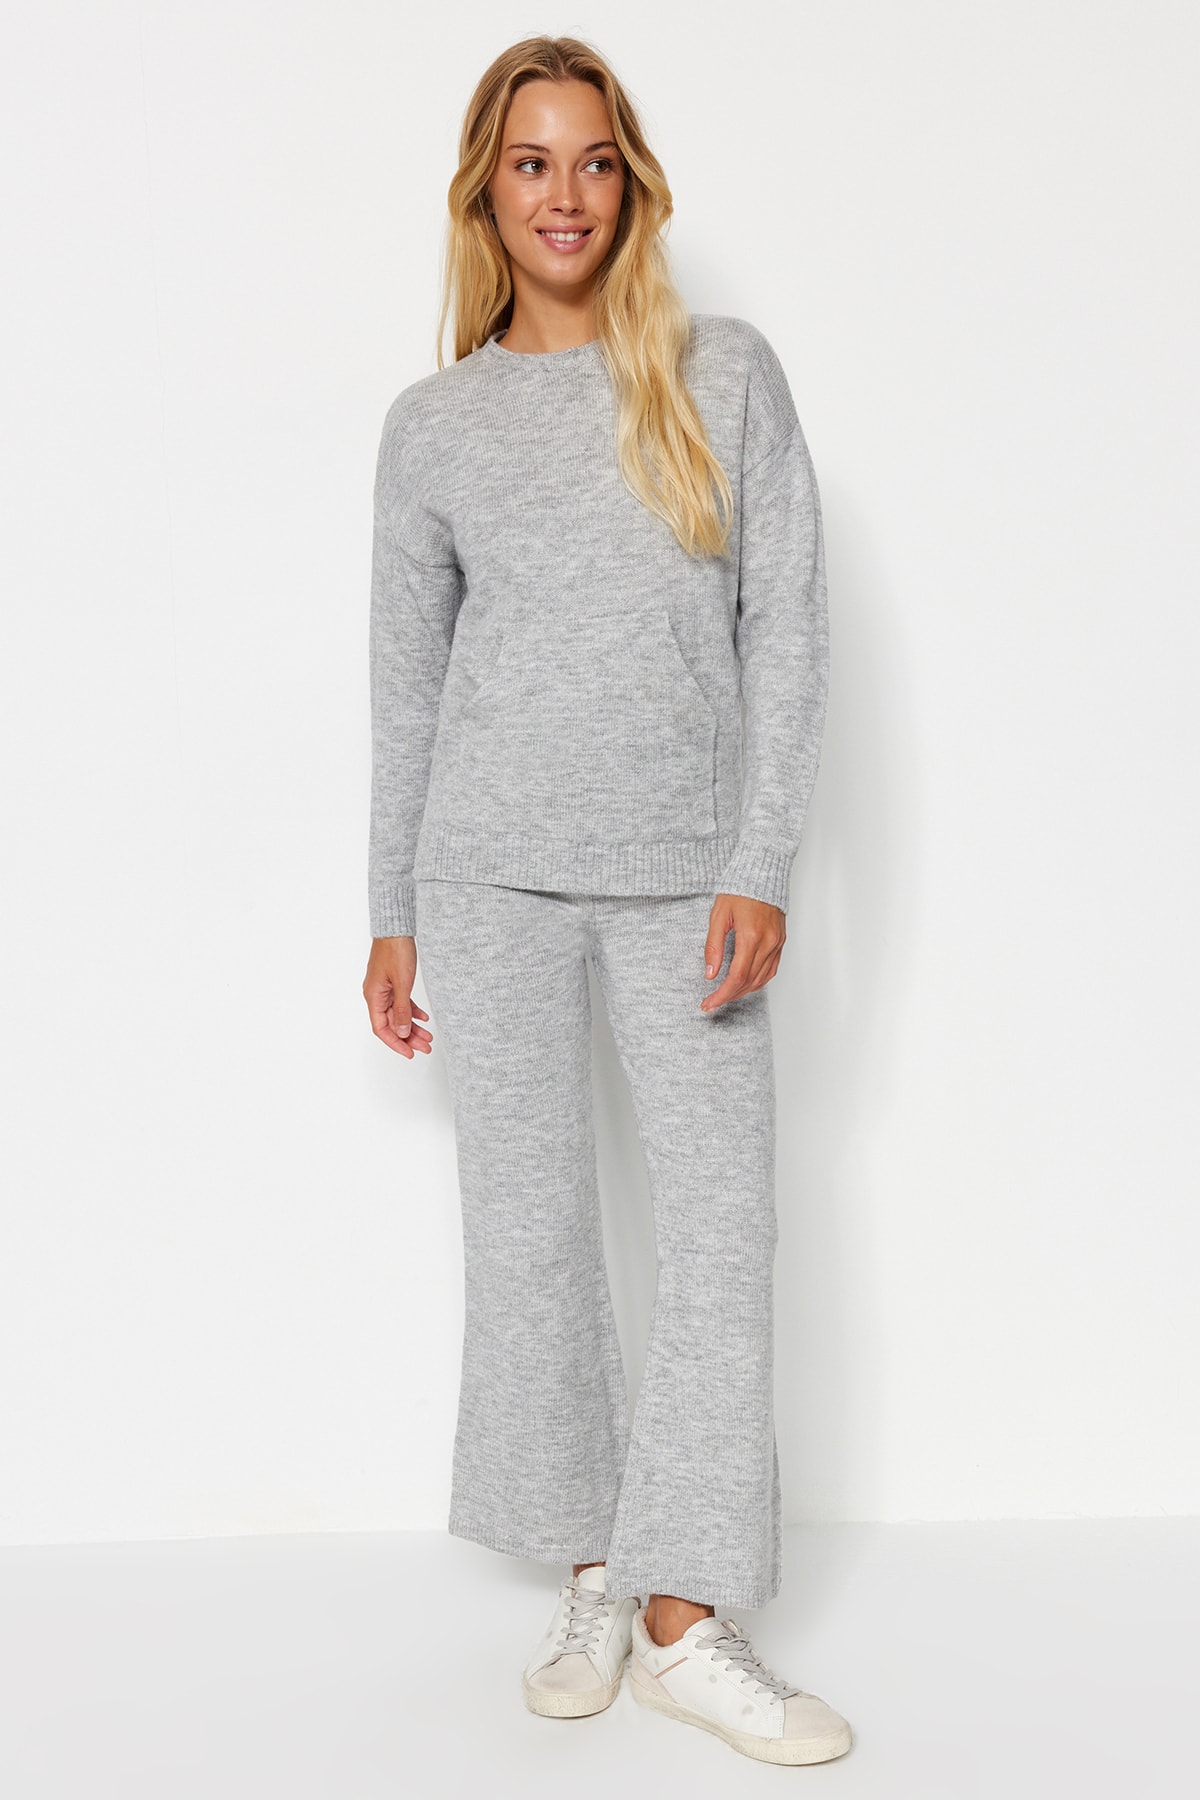 Trendyol Gray Soft Textured Basic Knitwear Top and Bottom Set